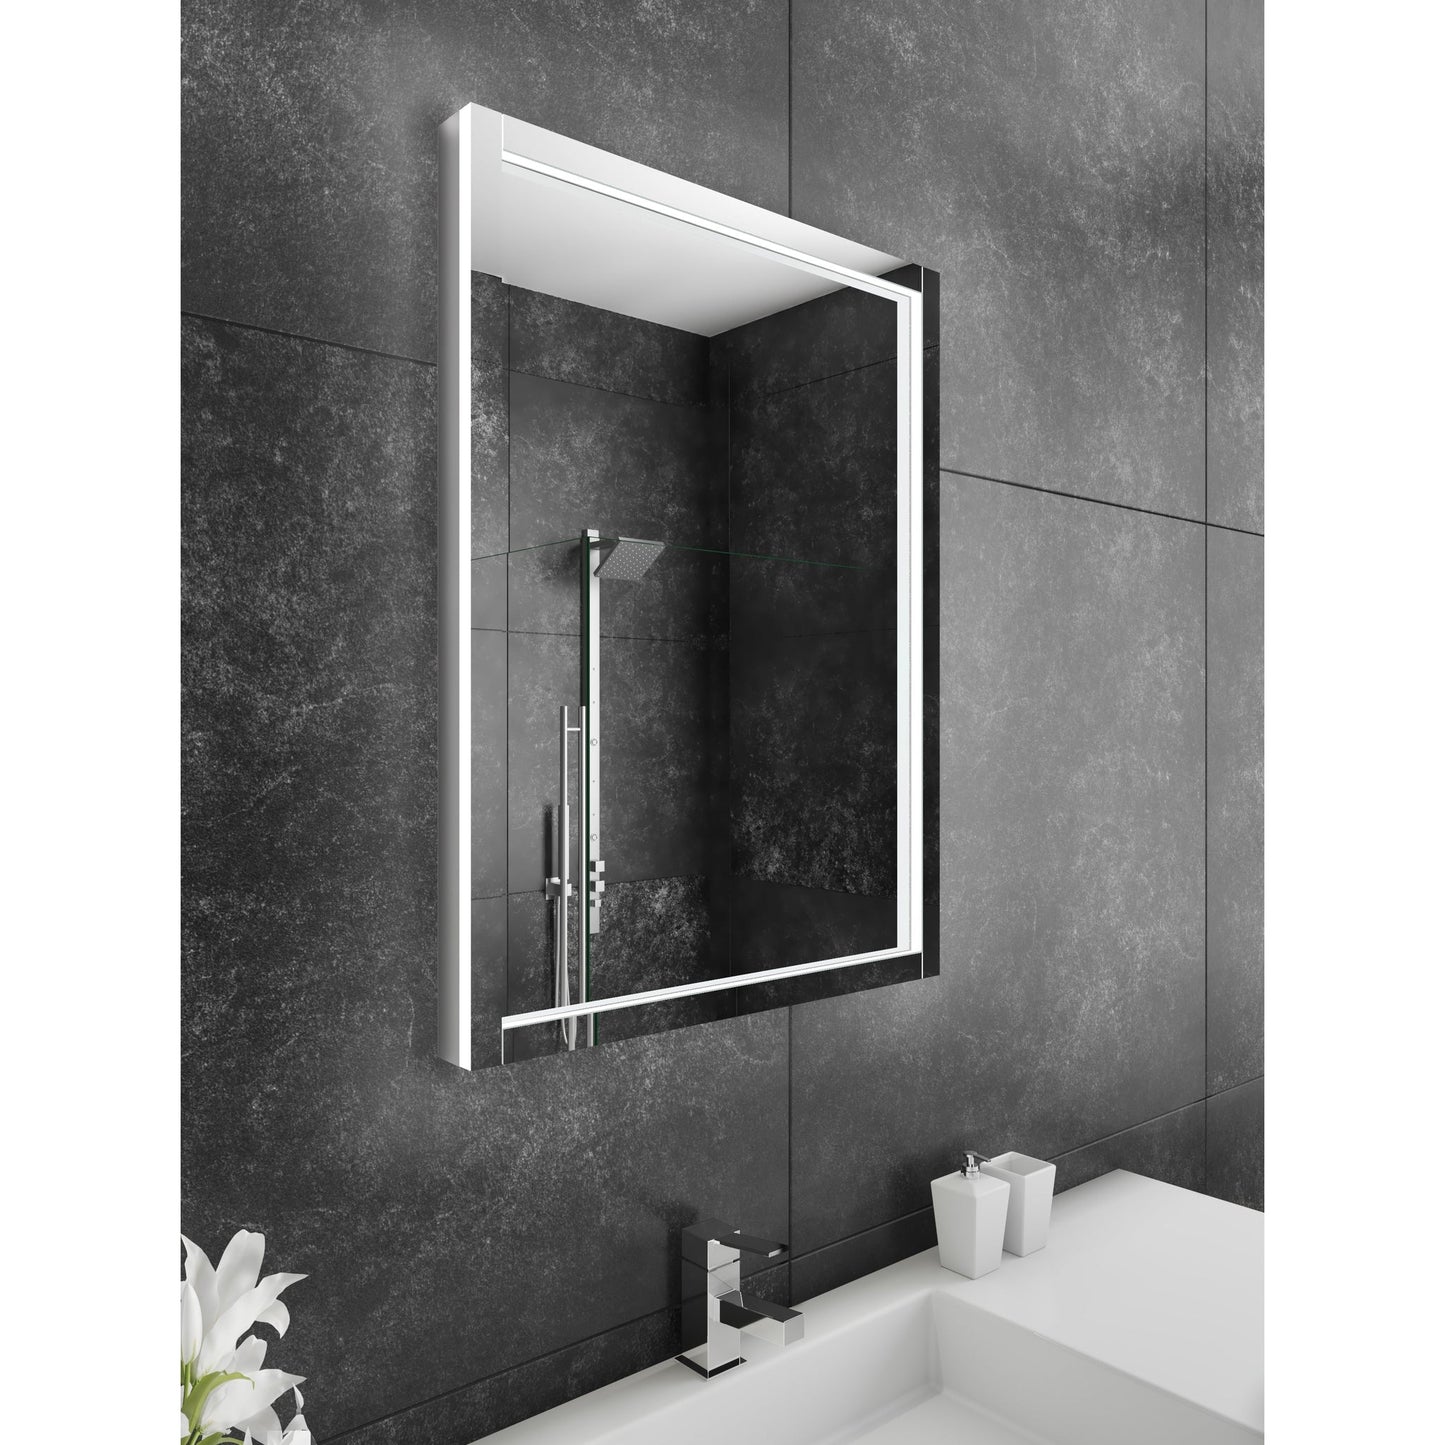 Paris Mirror Flore 24" x 32" Dual-Lighted Super Bright Dimmable Wall-Mounted 6000K LED Mirror With Embossed Glass 3D Design